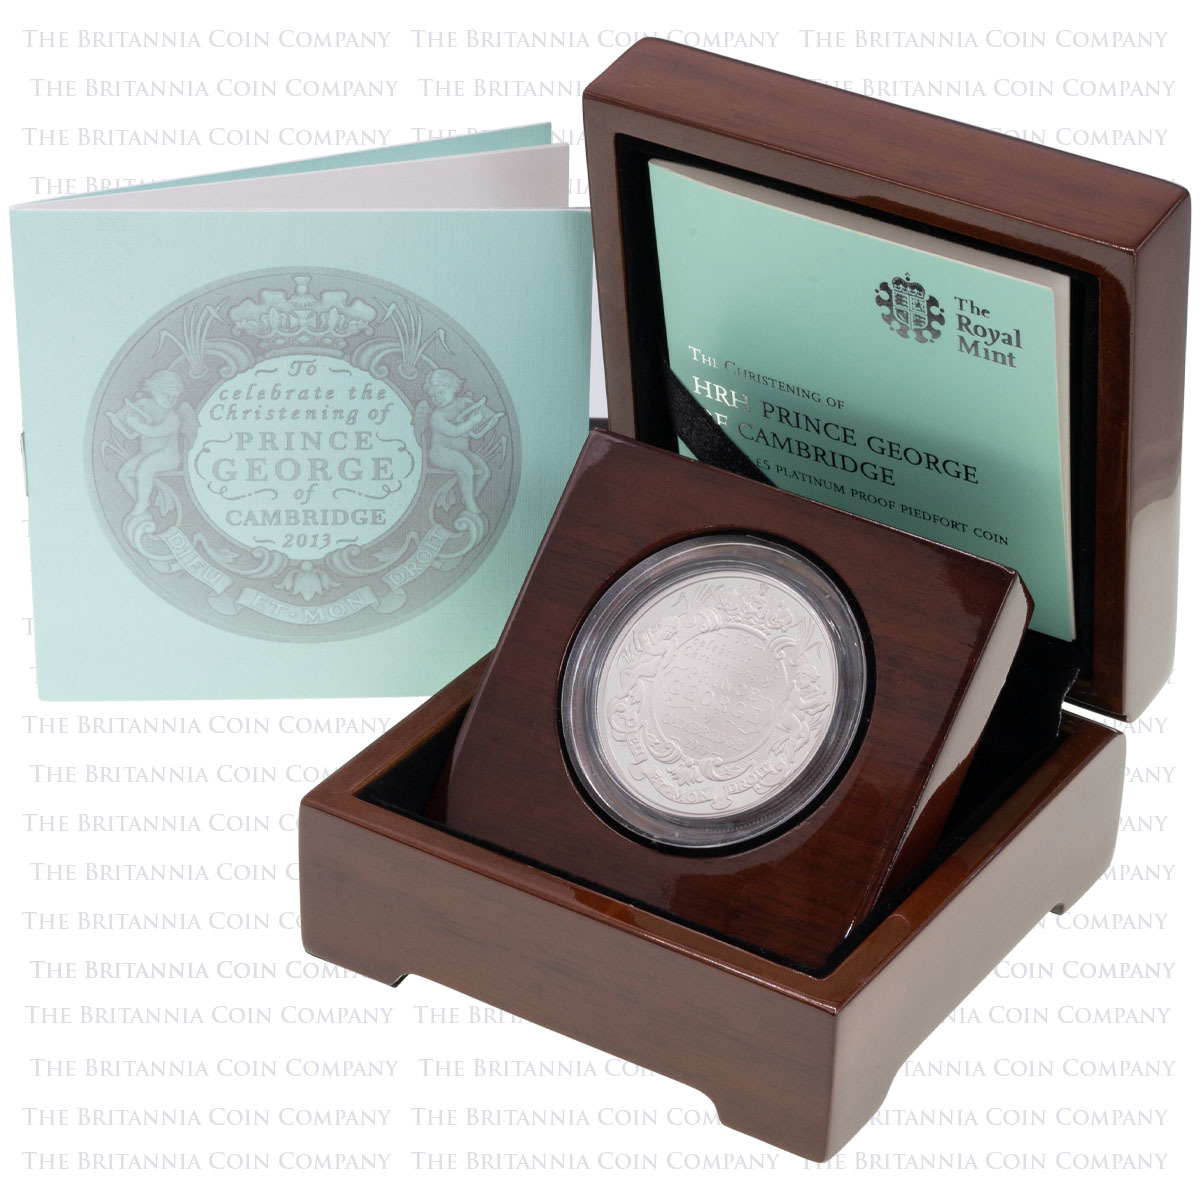 UKGCPT 2013 Prince George Christening Five Pound Crown Piedfort Platinum Proof Coin Boxed